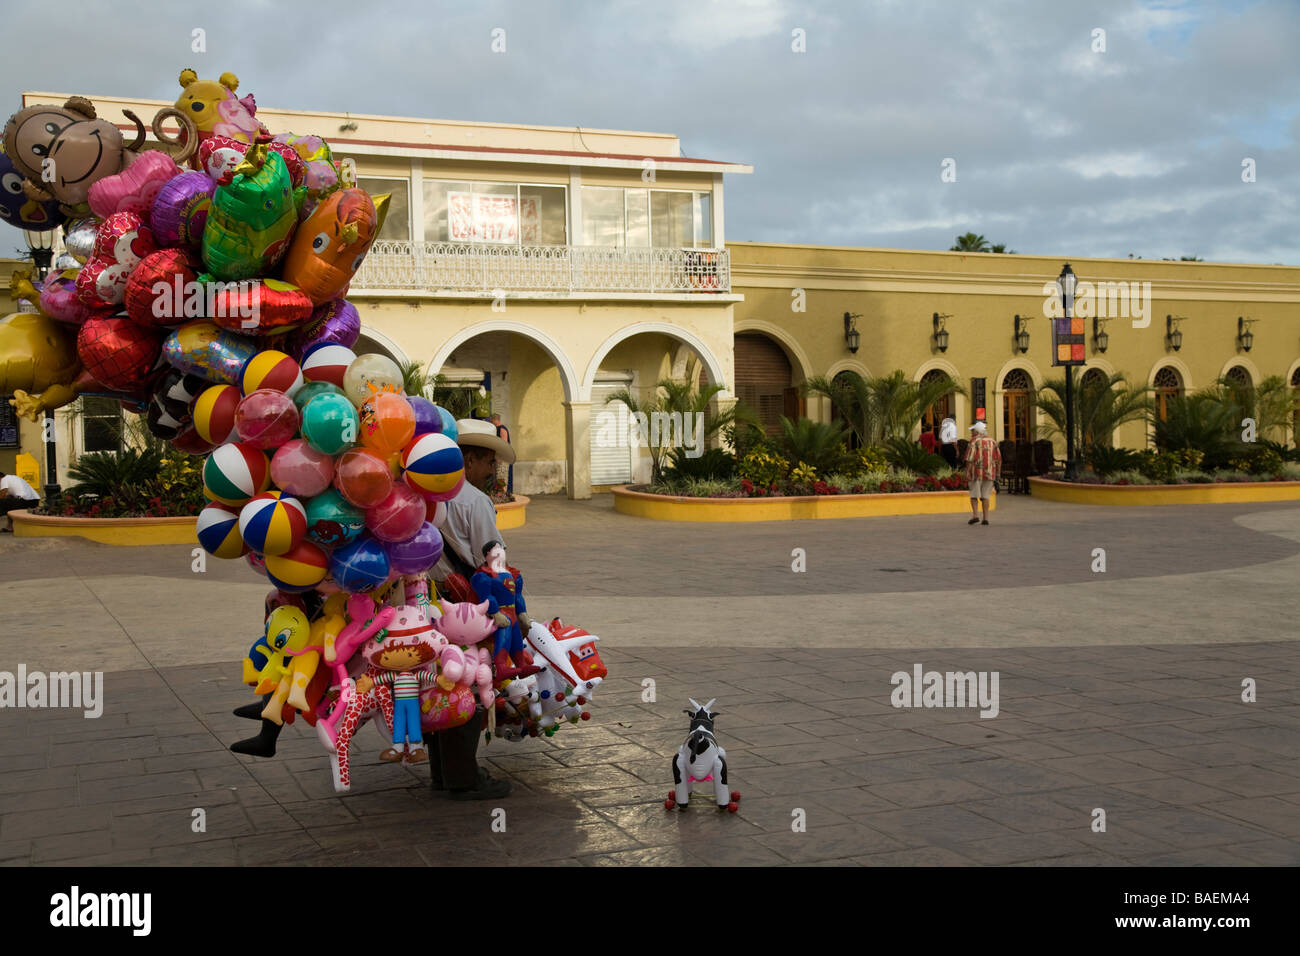 MEXICO San Jose del Cabo Mexican man carrying balloons and toys for children standing in downtown plaza Stock Photo